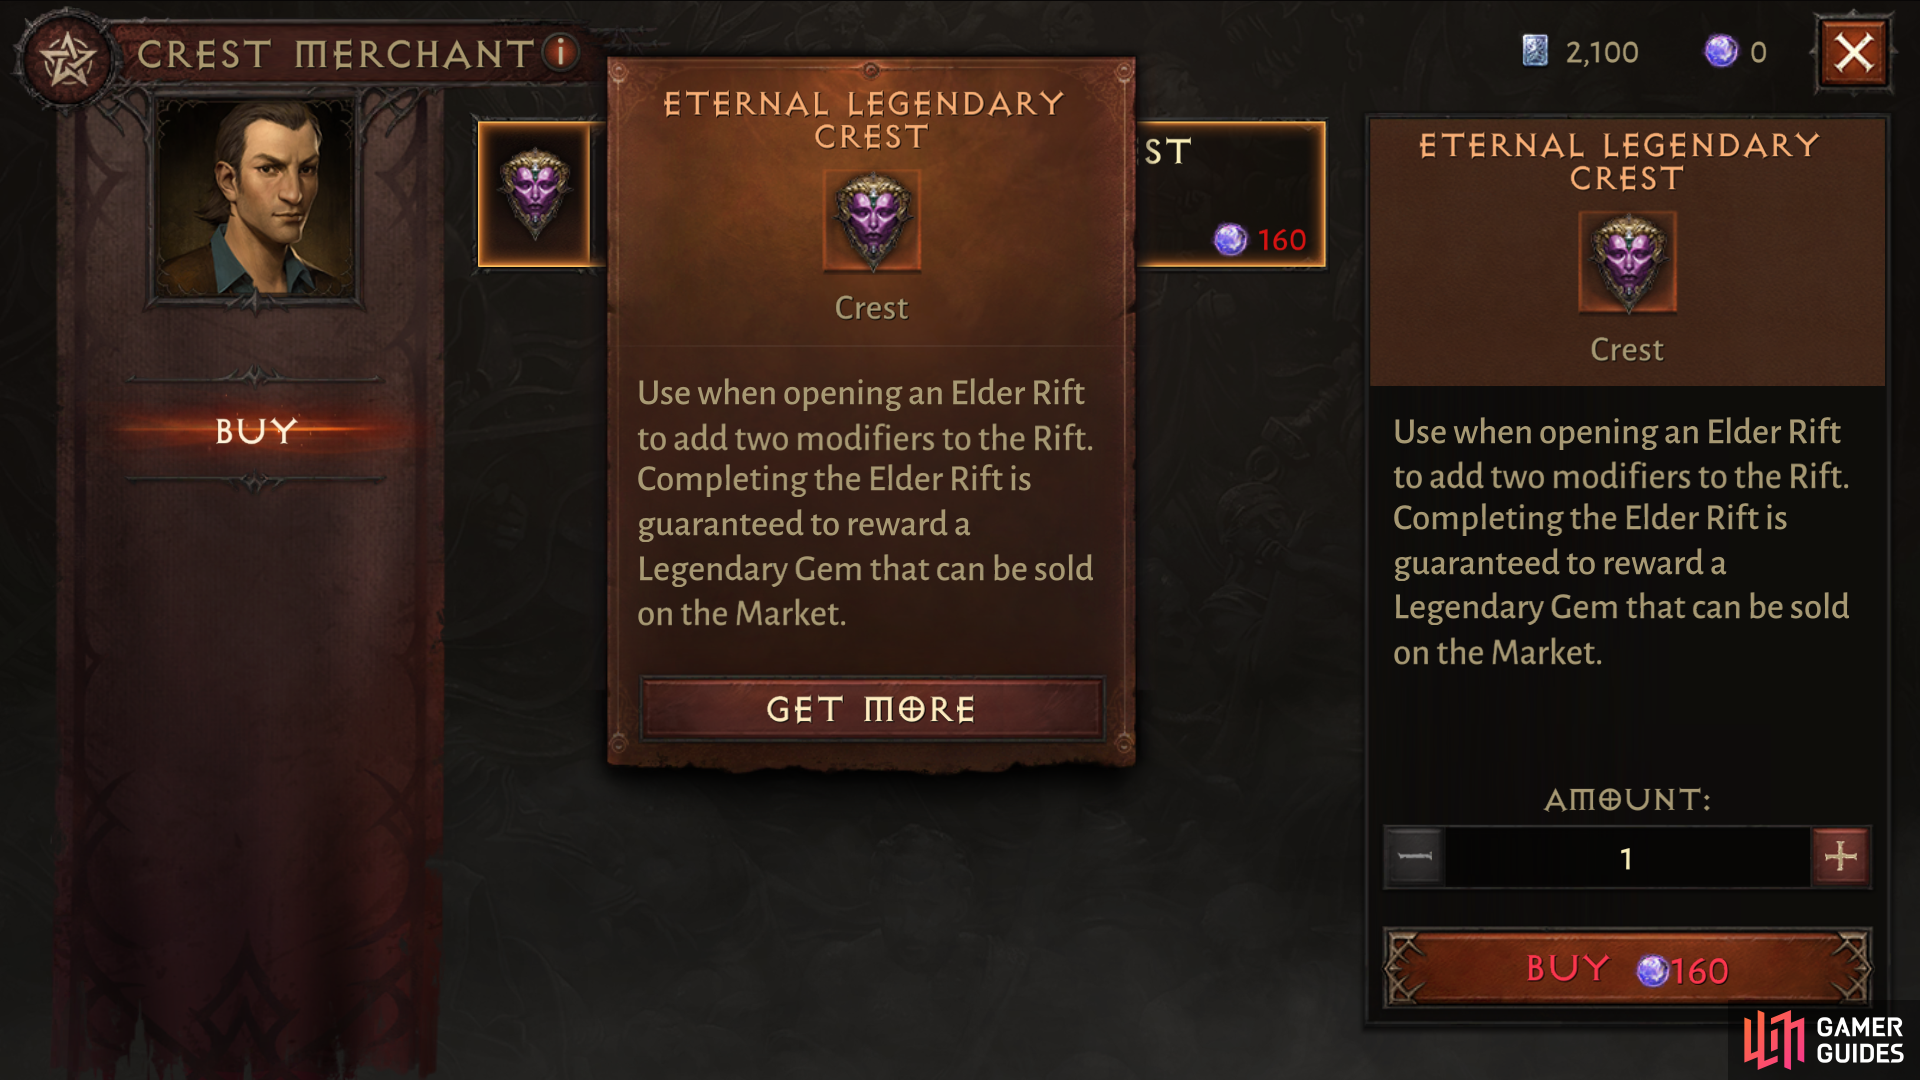 Spending Eternal Orbs at the Crest Merchant is  the only way to obtain Eternal Legendary Crests.